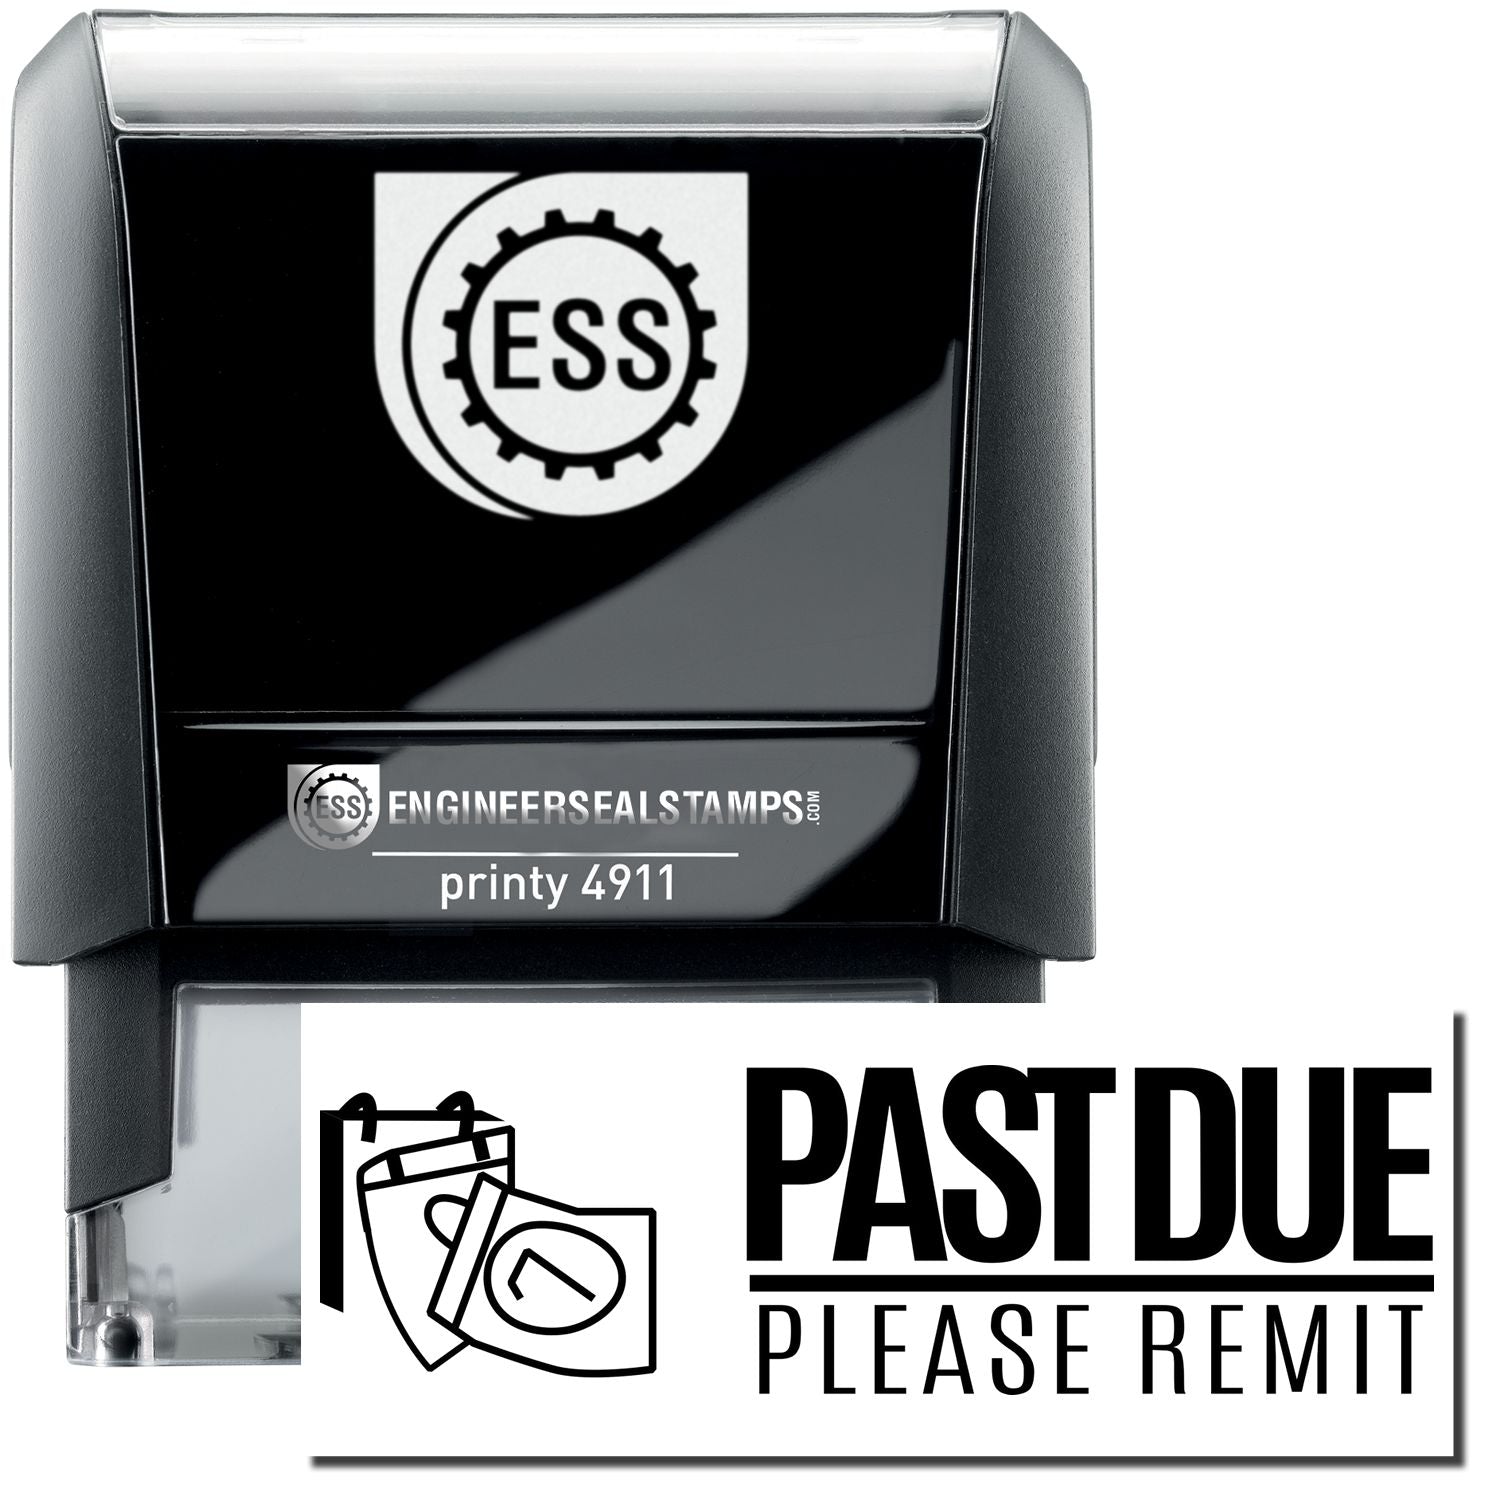 A self-inking stamp with a stamped image showing how the text "PAST DUE PLEASE REMIT" ("PAST DUE" in a bold font with a line underneath and "PLEASE REMIT" in narrow font under the line) with an icon of a calendar is displayed after stamping.